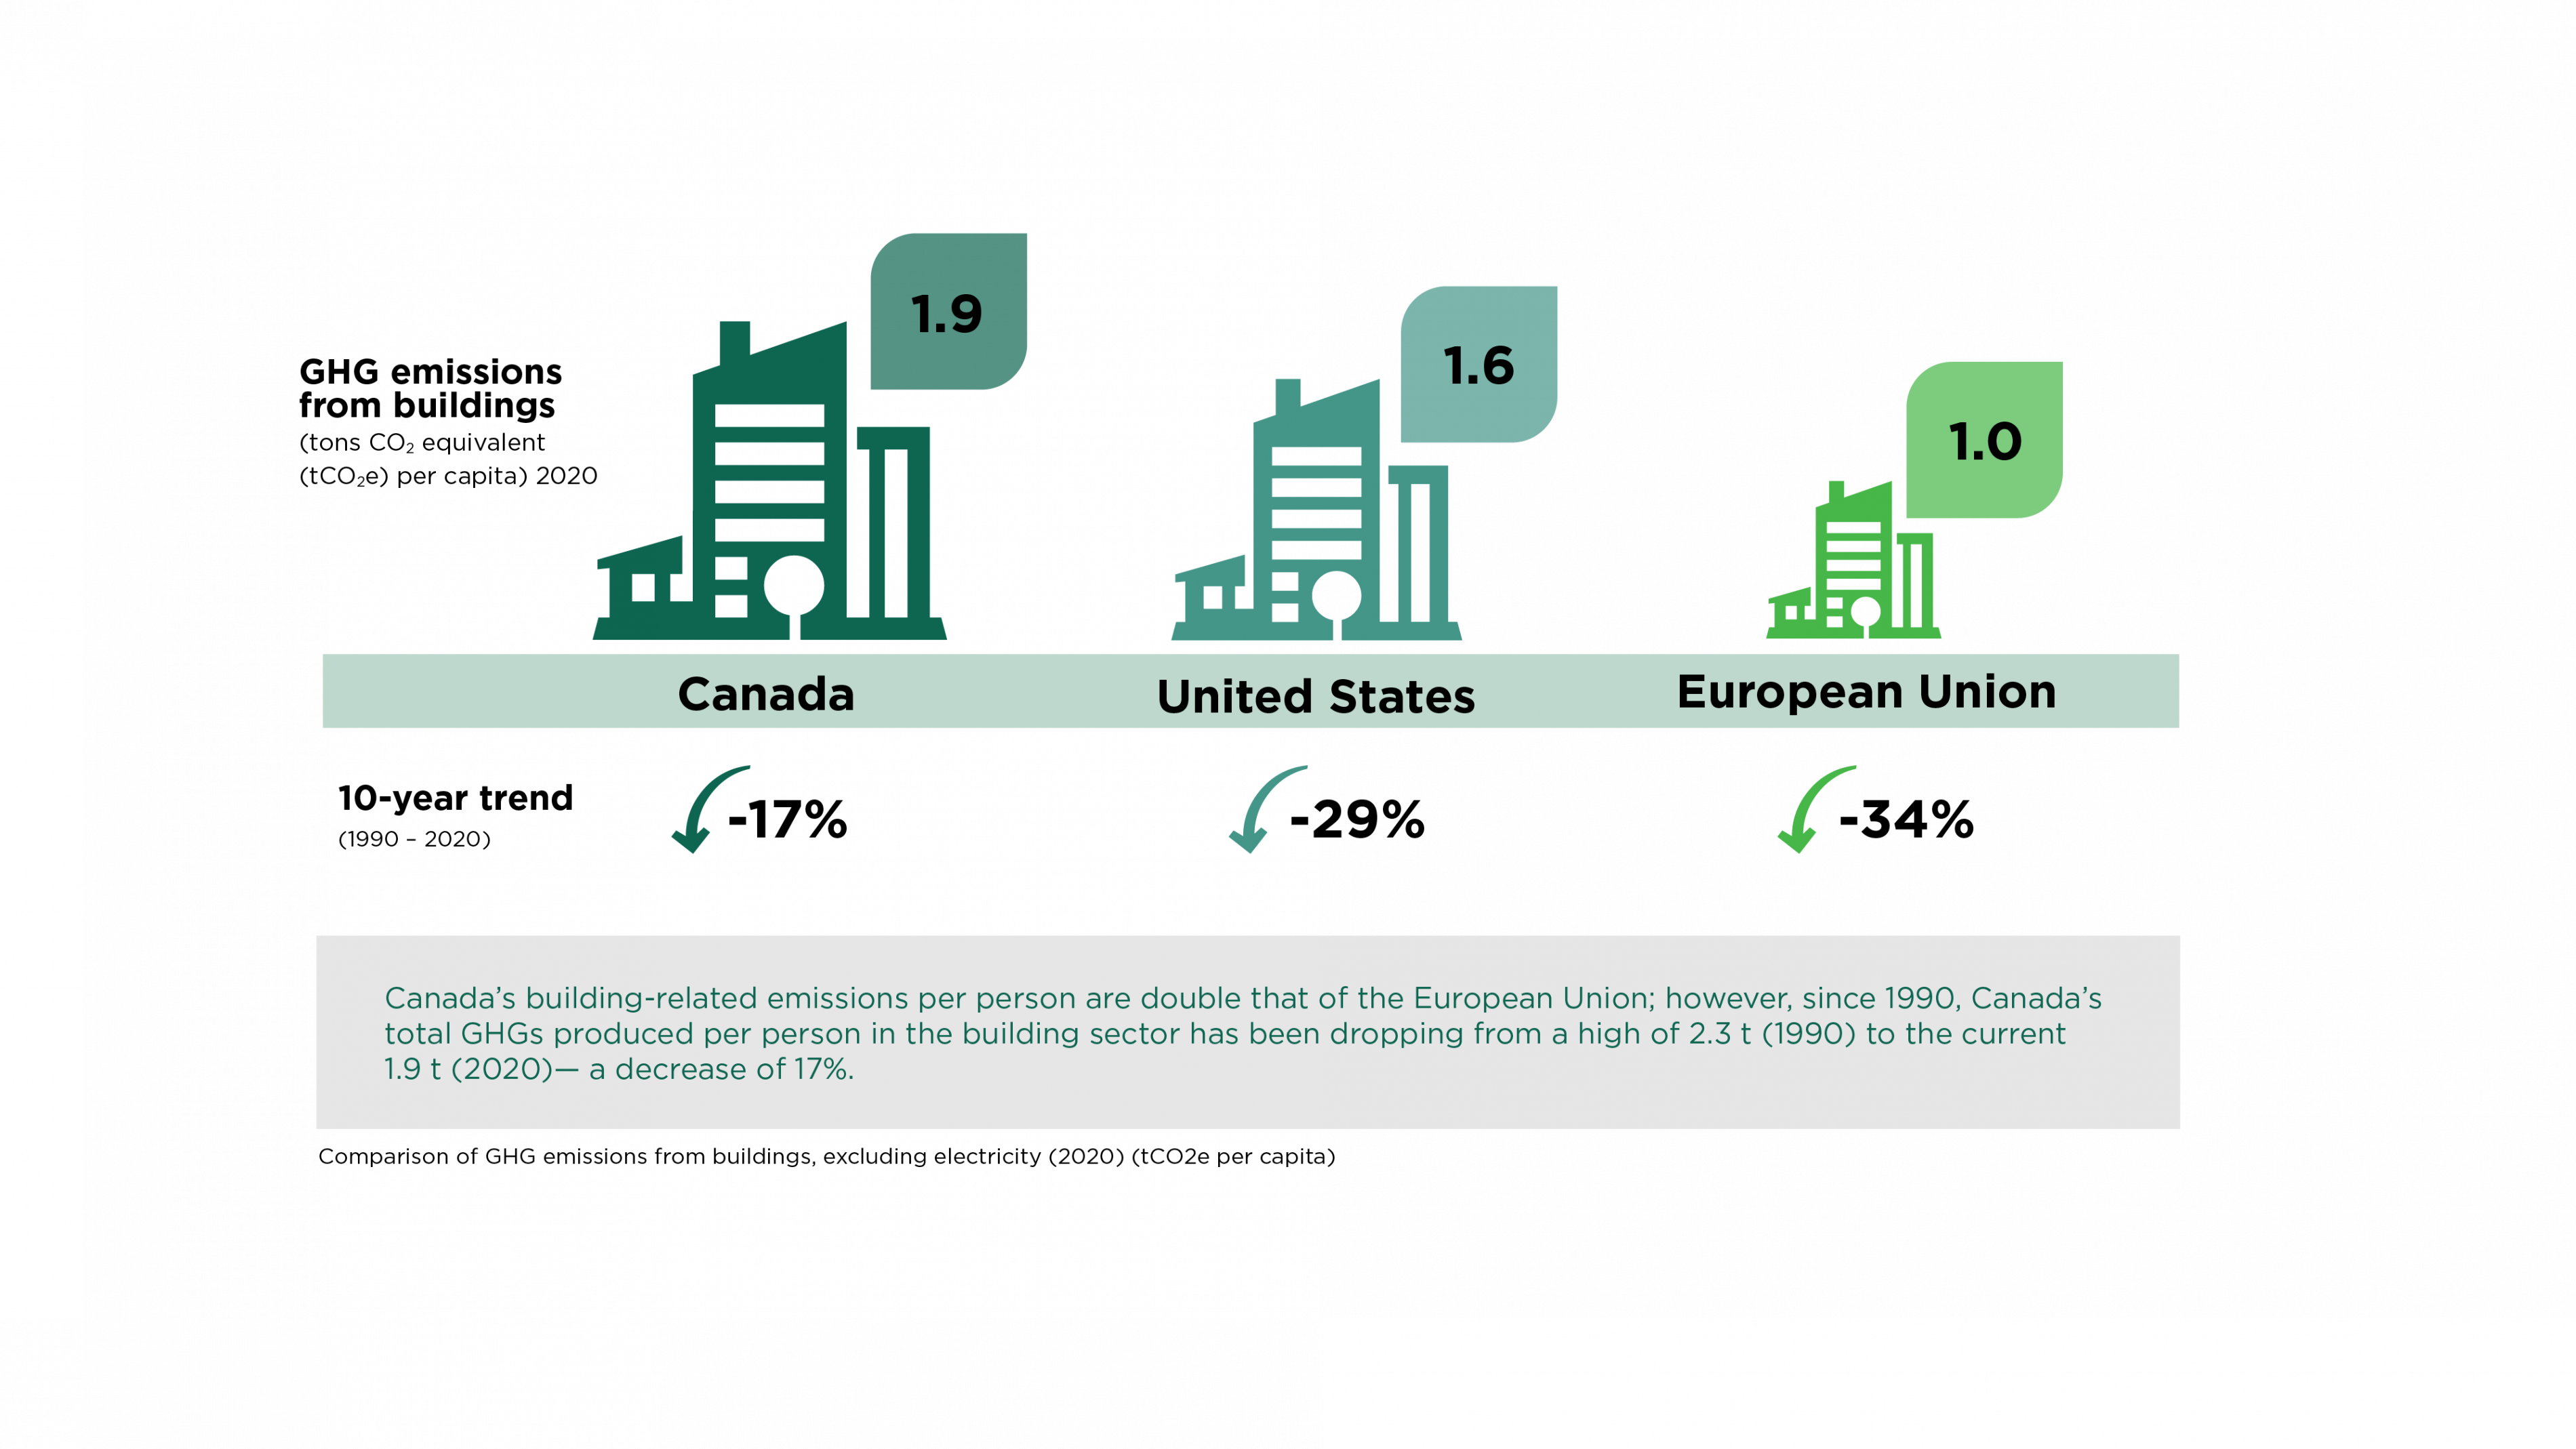 A graphic comparing the building GHG emissions per capita of Canada to the U.S. and the E.U. in 2020 (excluding electricity) (tons CO2 equivalent)